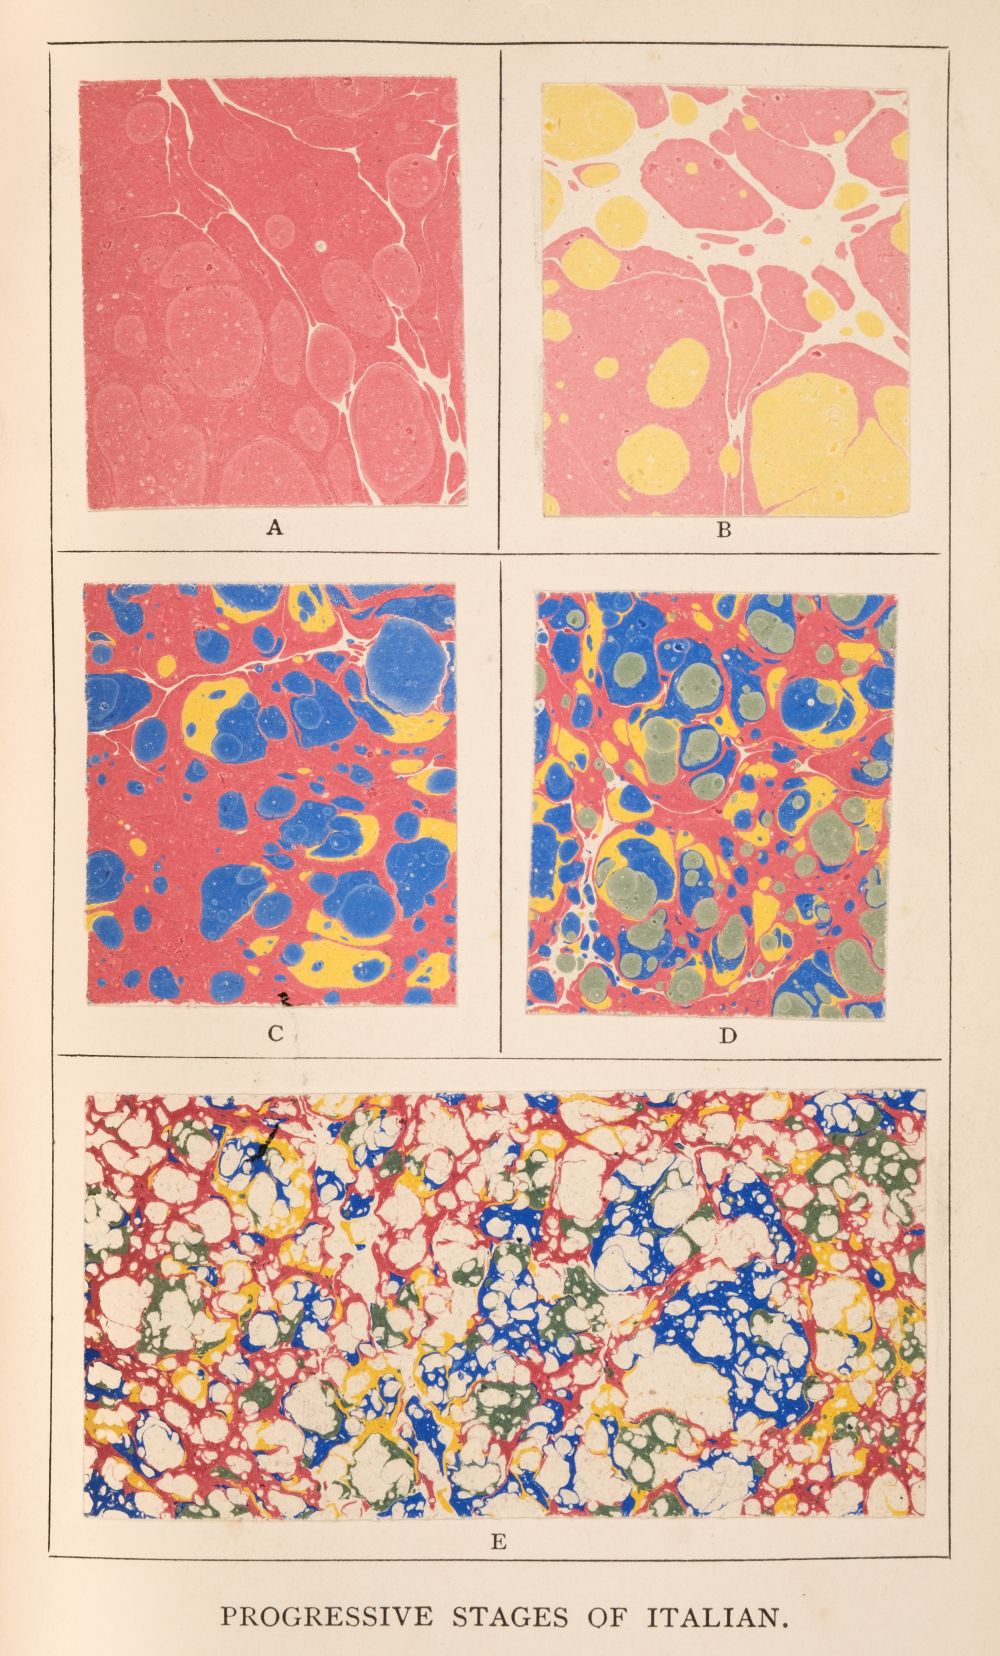 Woolnough (C. W.). The Whole Art of Marbling as applied to paper, 3rd ed., 1881